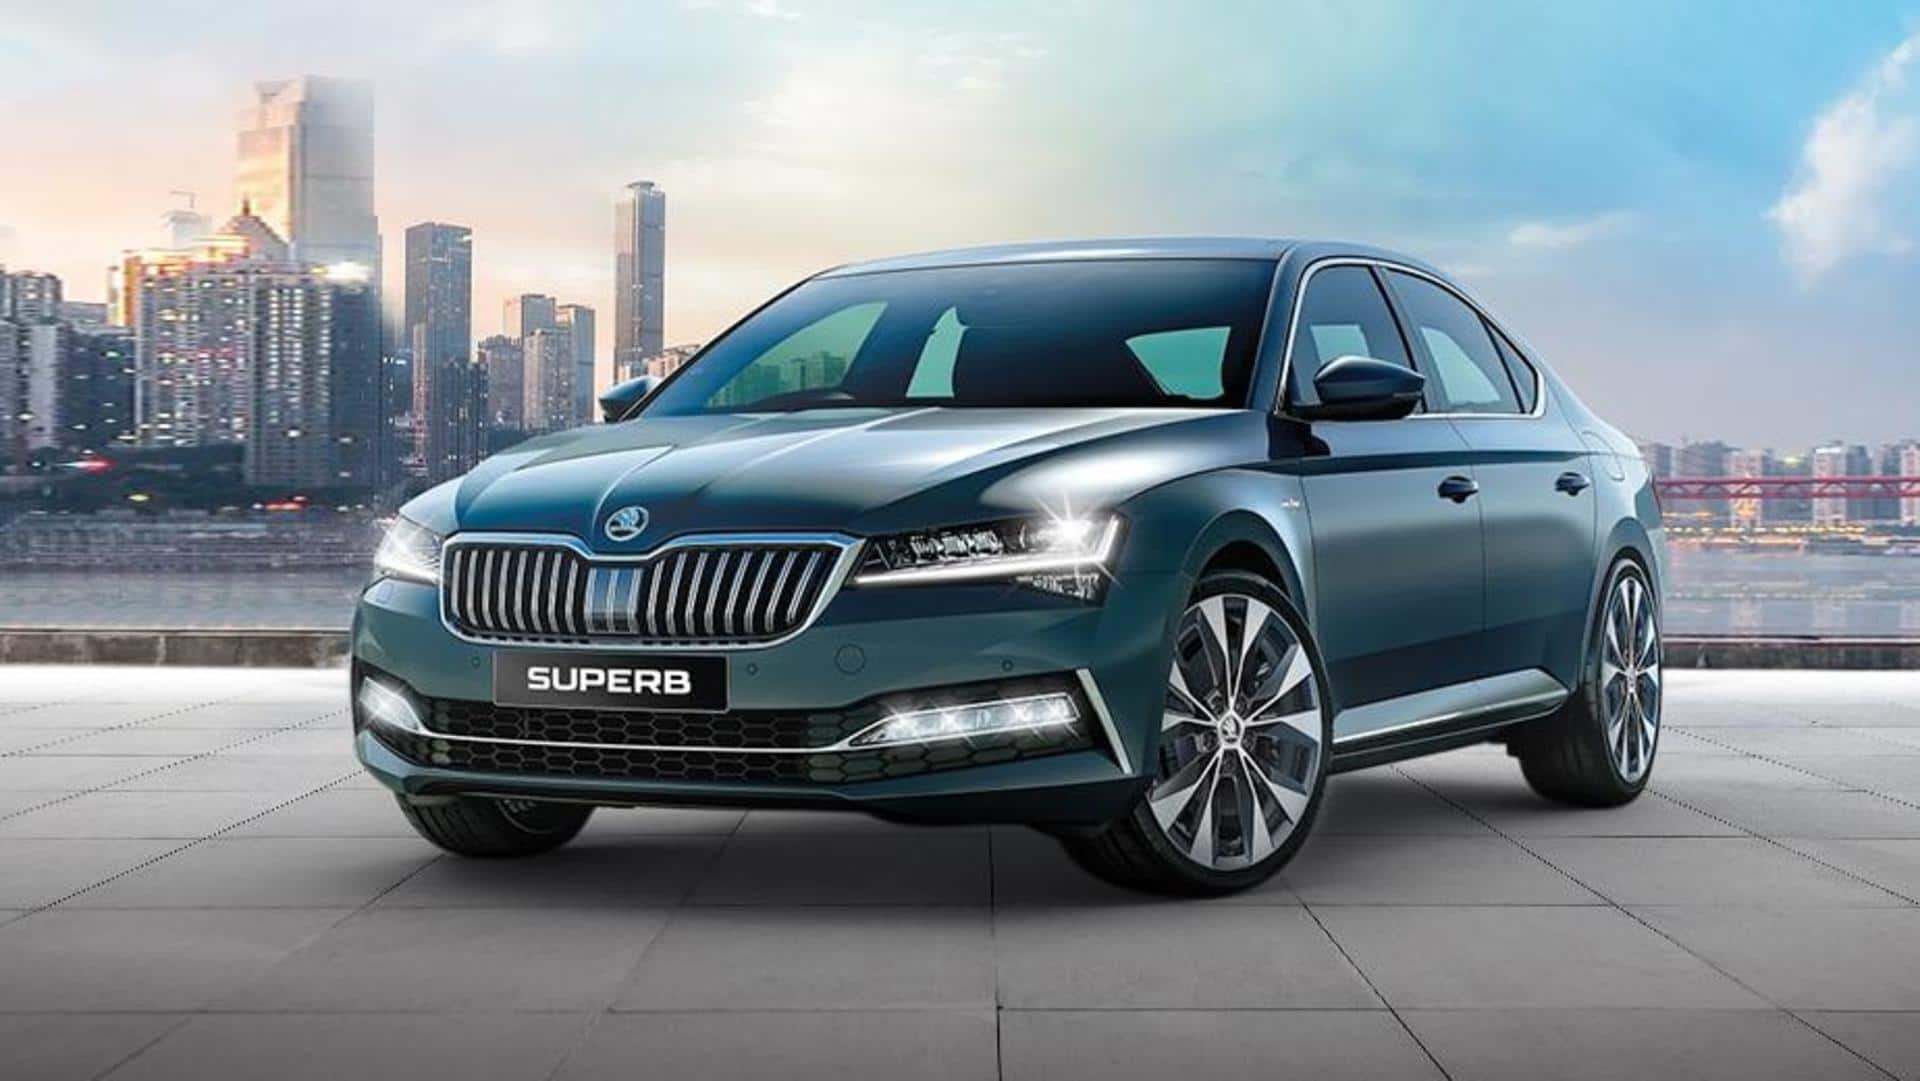 Expected features of the 2023 SKODA SUPERB full-size sedan